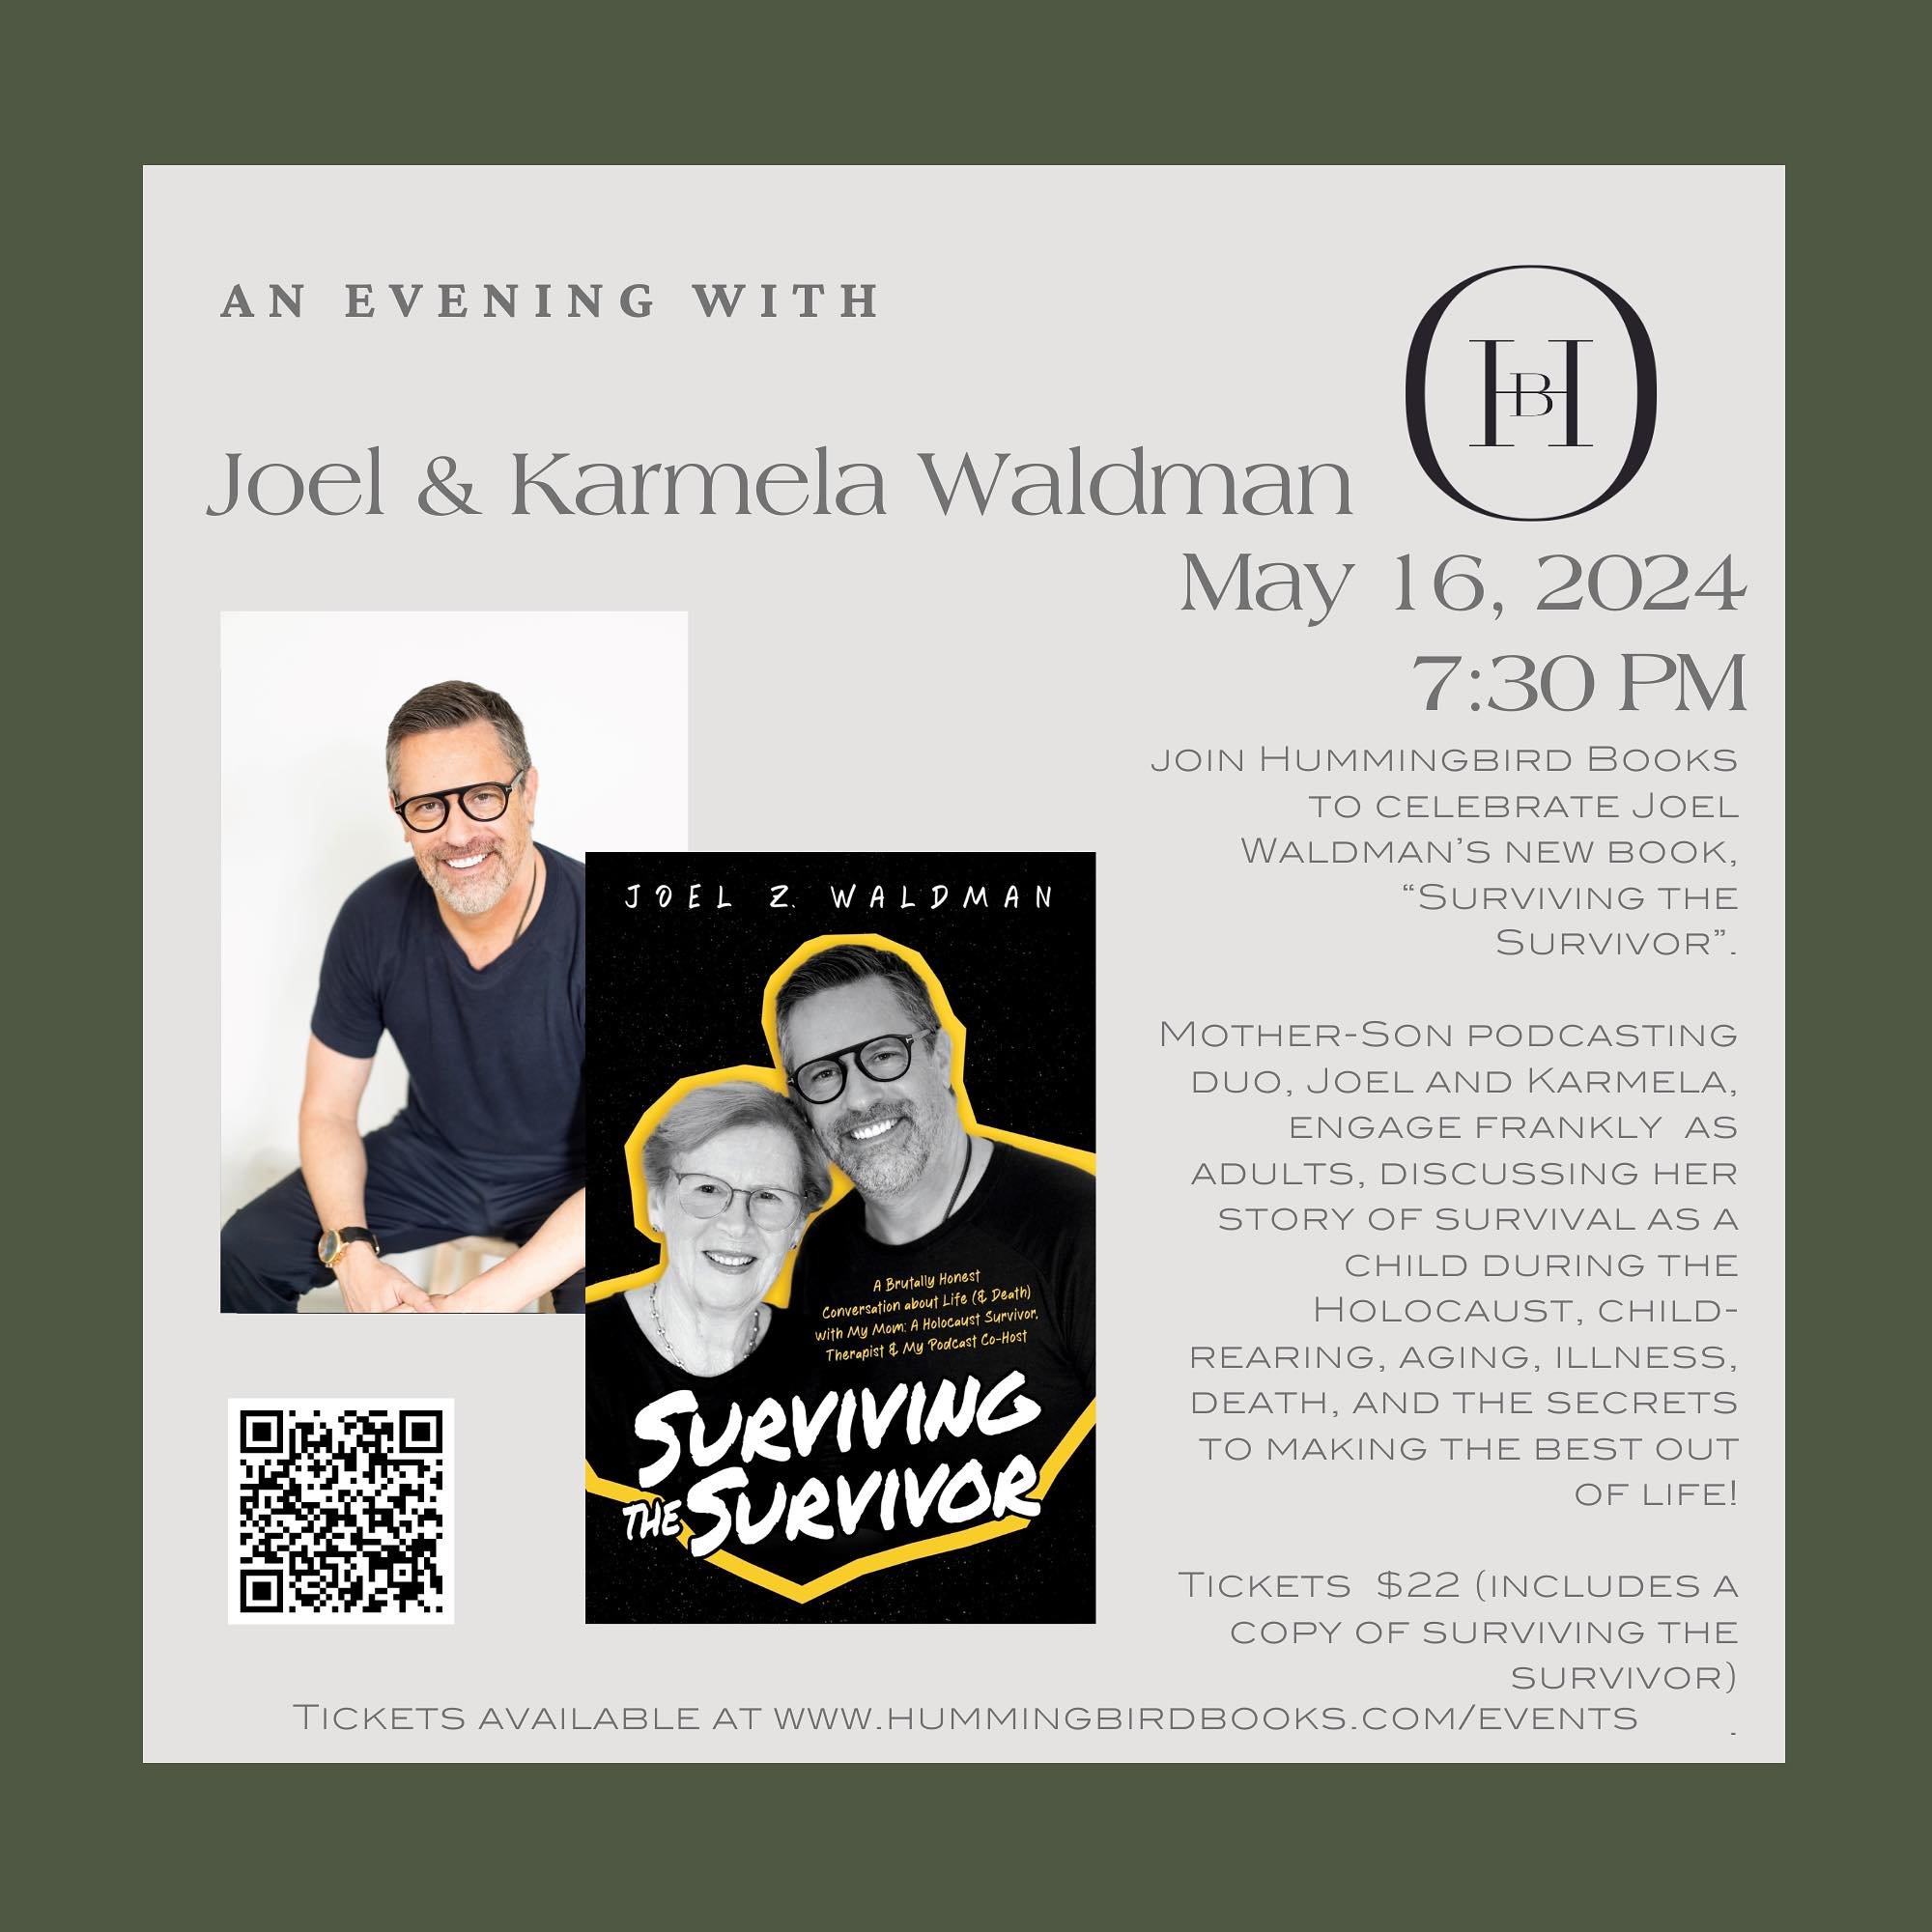 REPOSTED to correct an error!

Join us to welcome @survivingthesurvivor mother-son podcasting duo Joel and Karmela Waldman to celebrate Joel&rsquo;s new book, &ldquo;Surviving the Survivor.&rdquo; Tickets are available on the events page of our websi